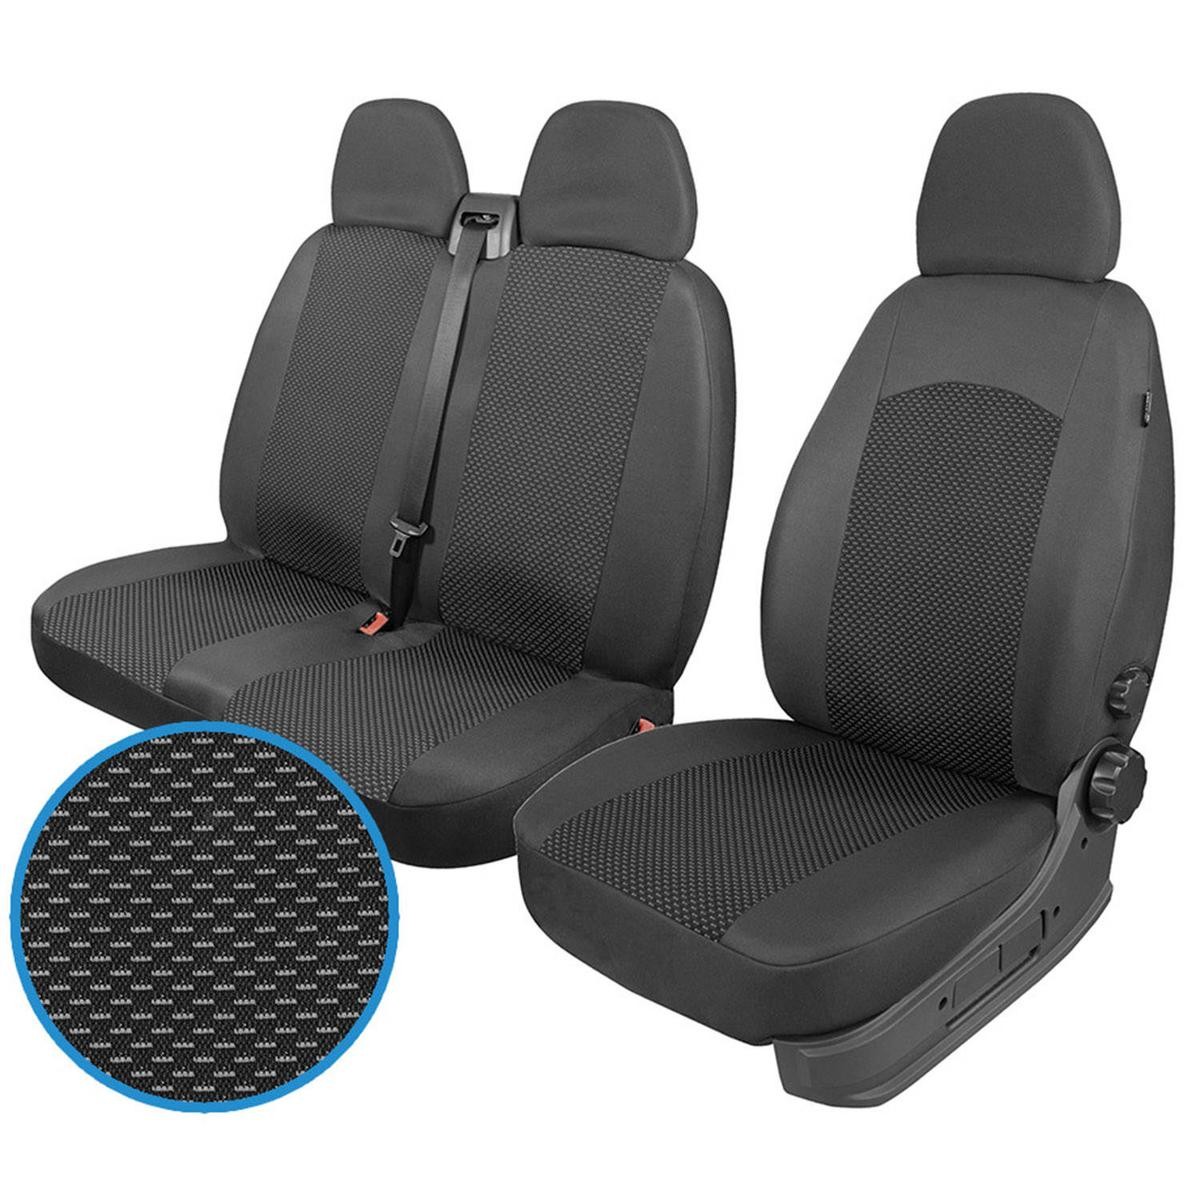 ATRA S-/54_T06 Car seat cover black, Front and Rear